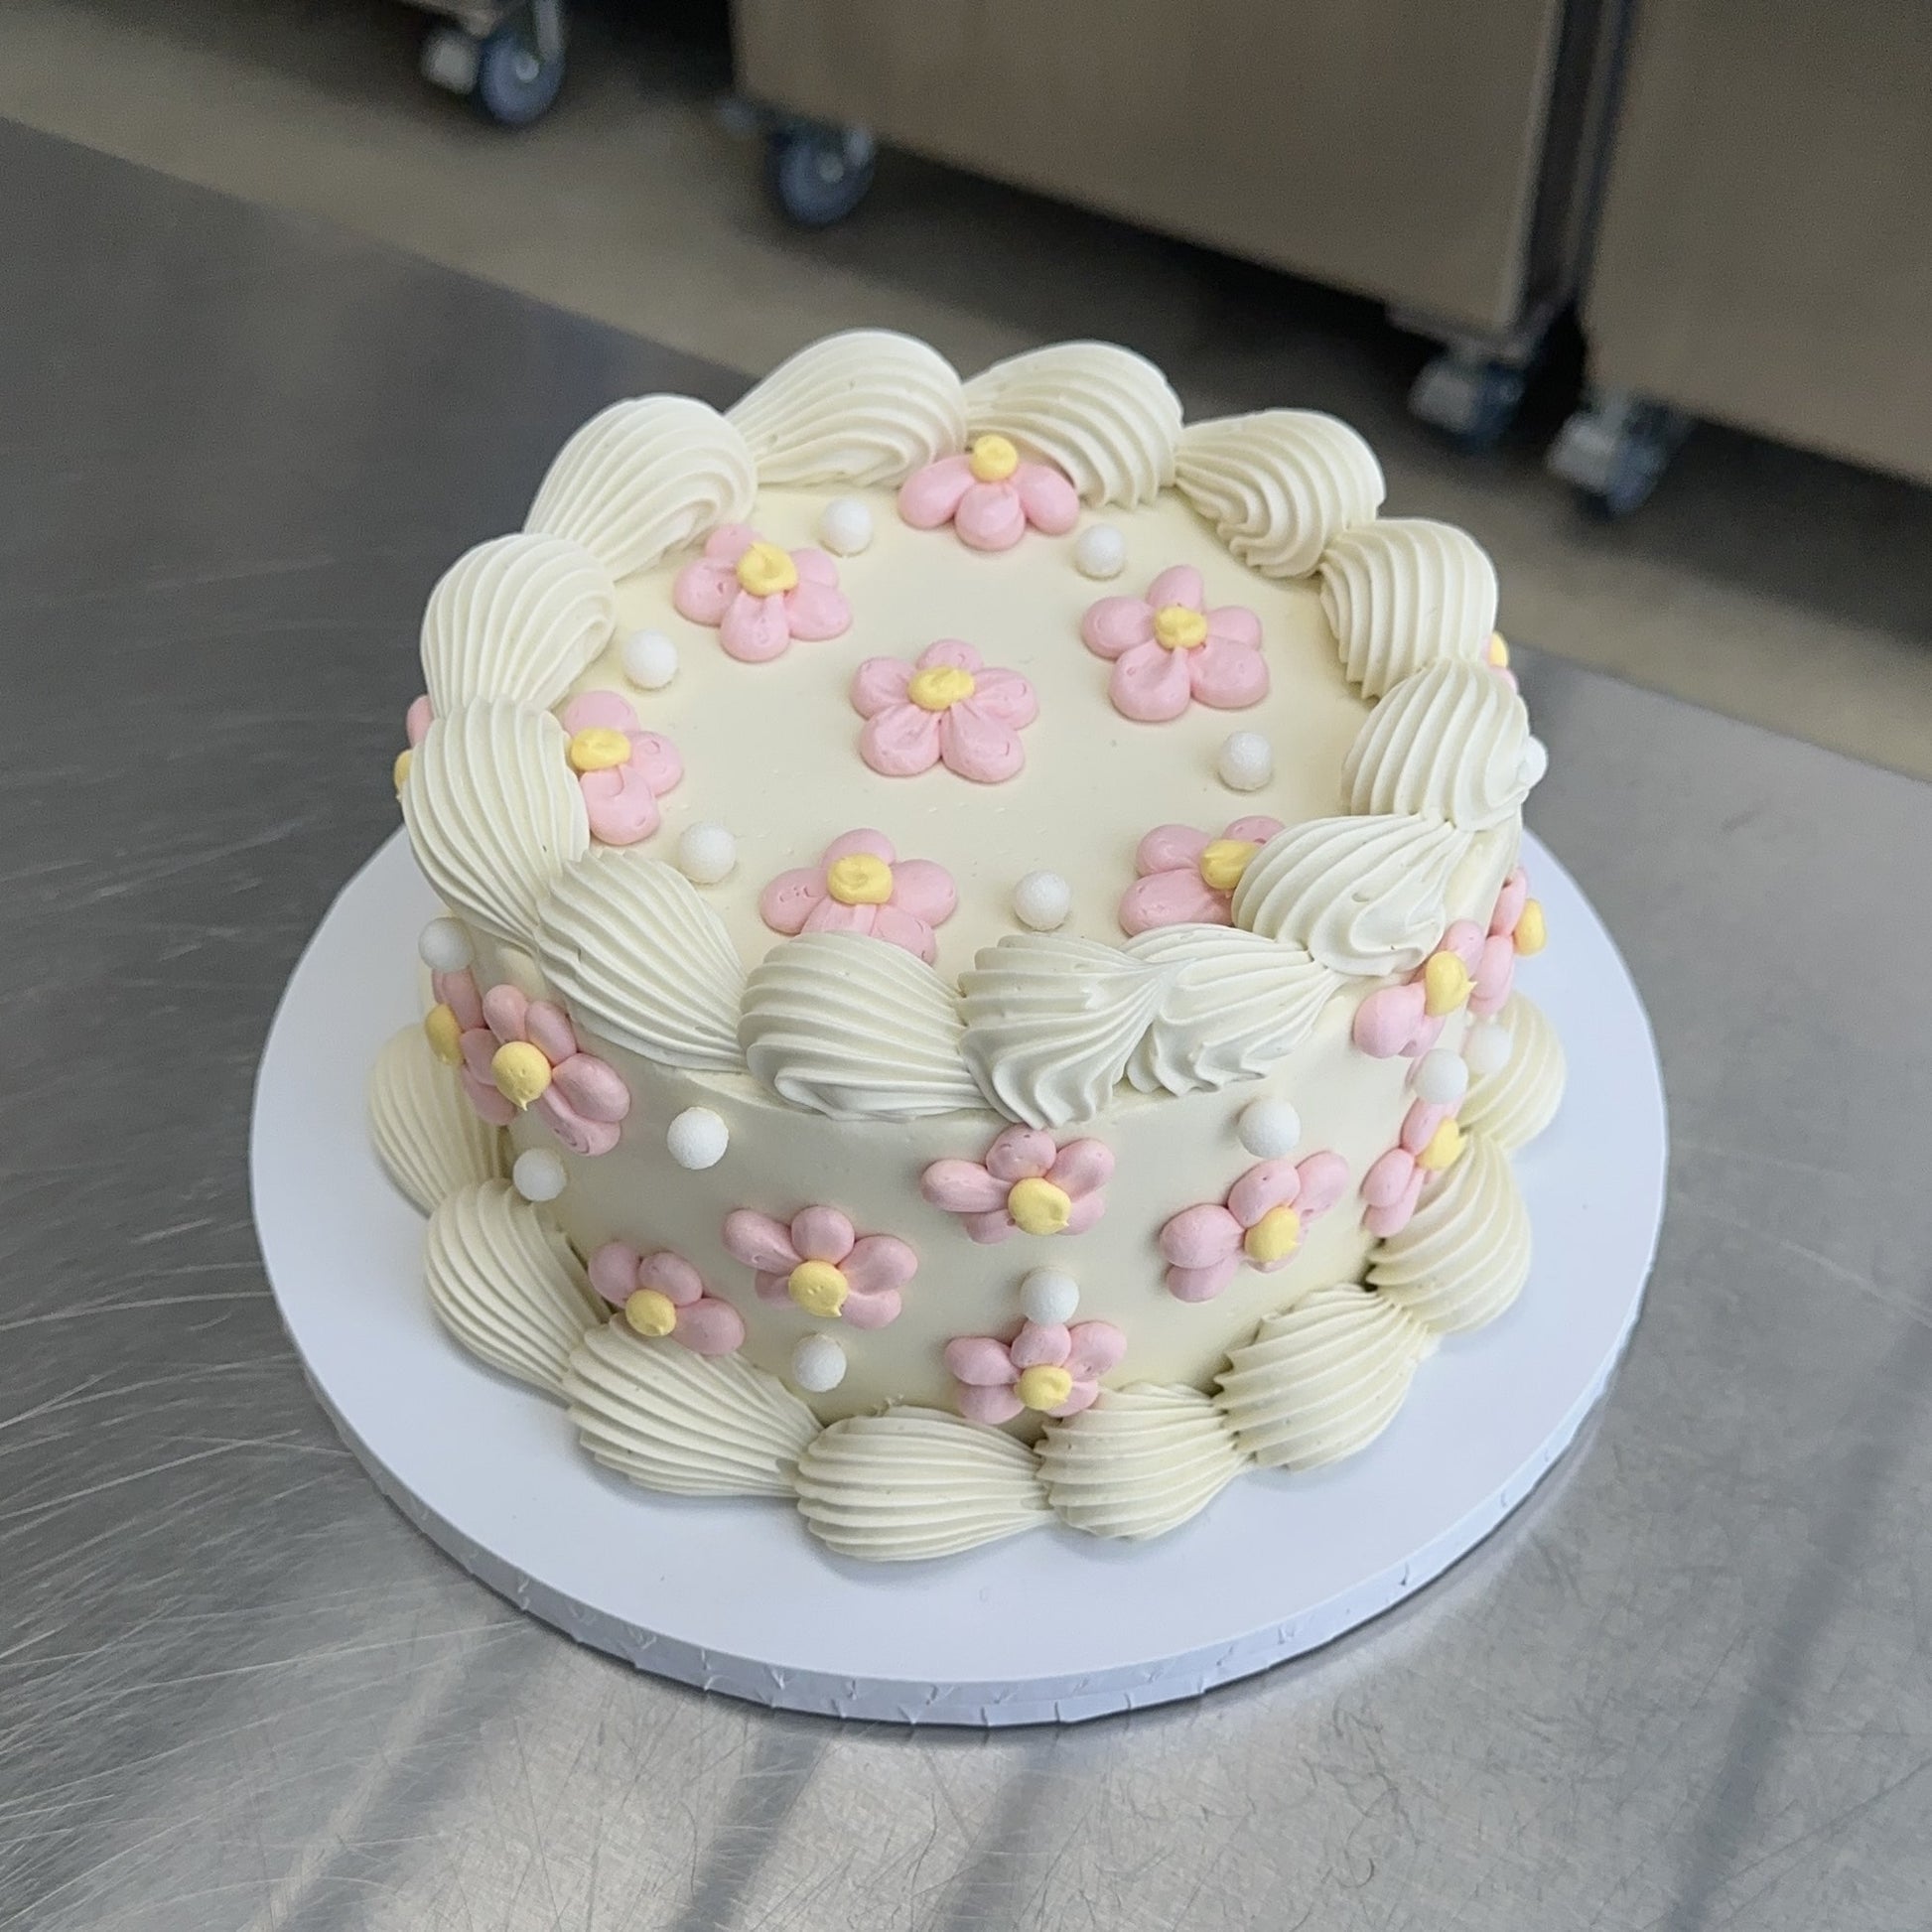 A round shaped vintage style sponge cake coated with a white swiss buttercream meringue. The base and top edges are decorated in white with a piped shell and the sides and top are decorated with lots of pink and yellow buttercream daisies.